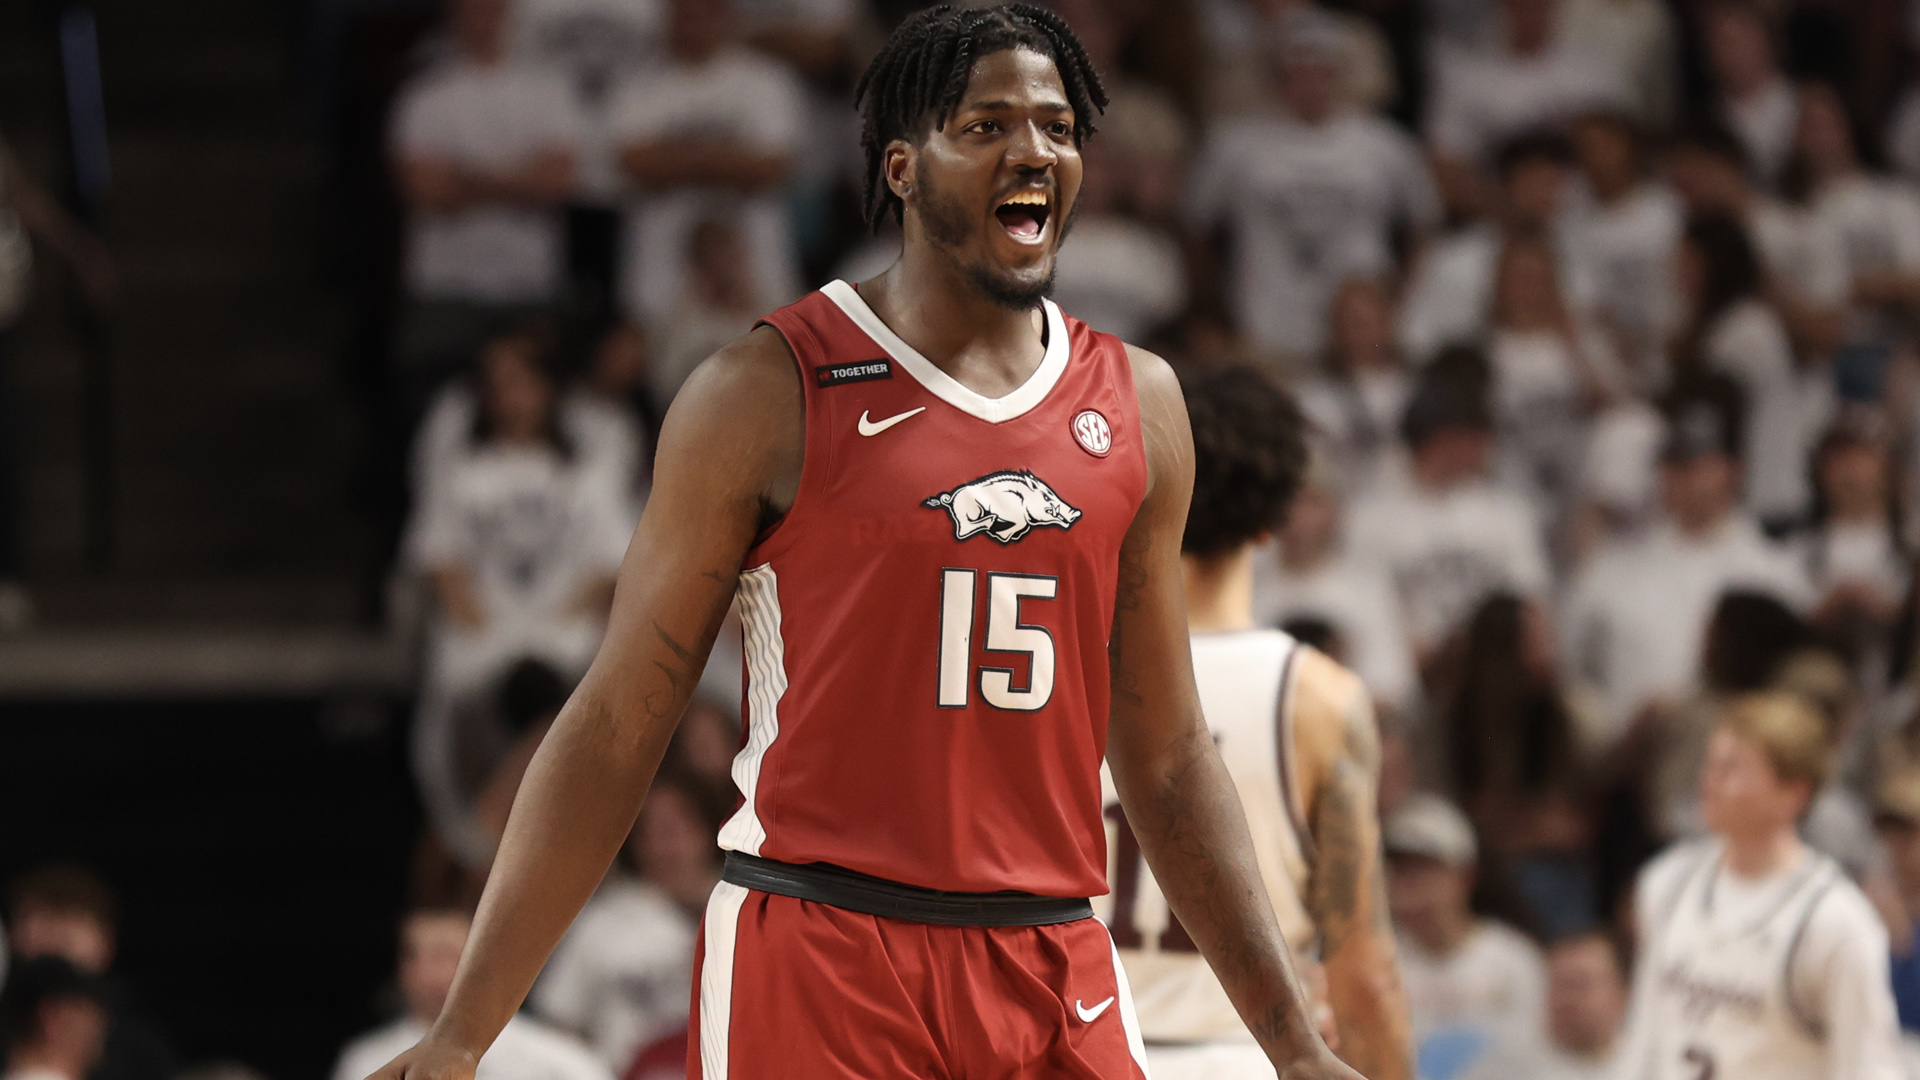 Hogs hold off Aggies, 78-71